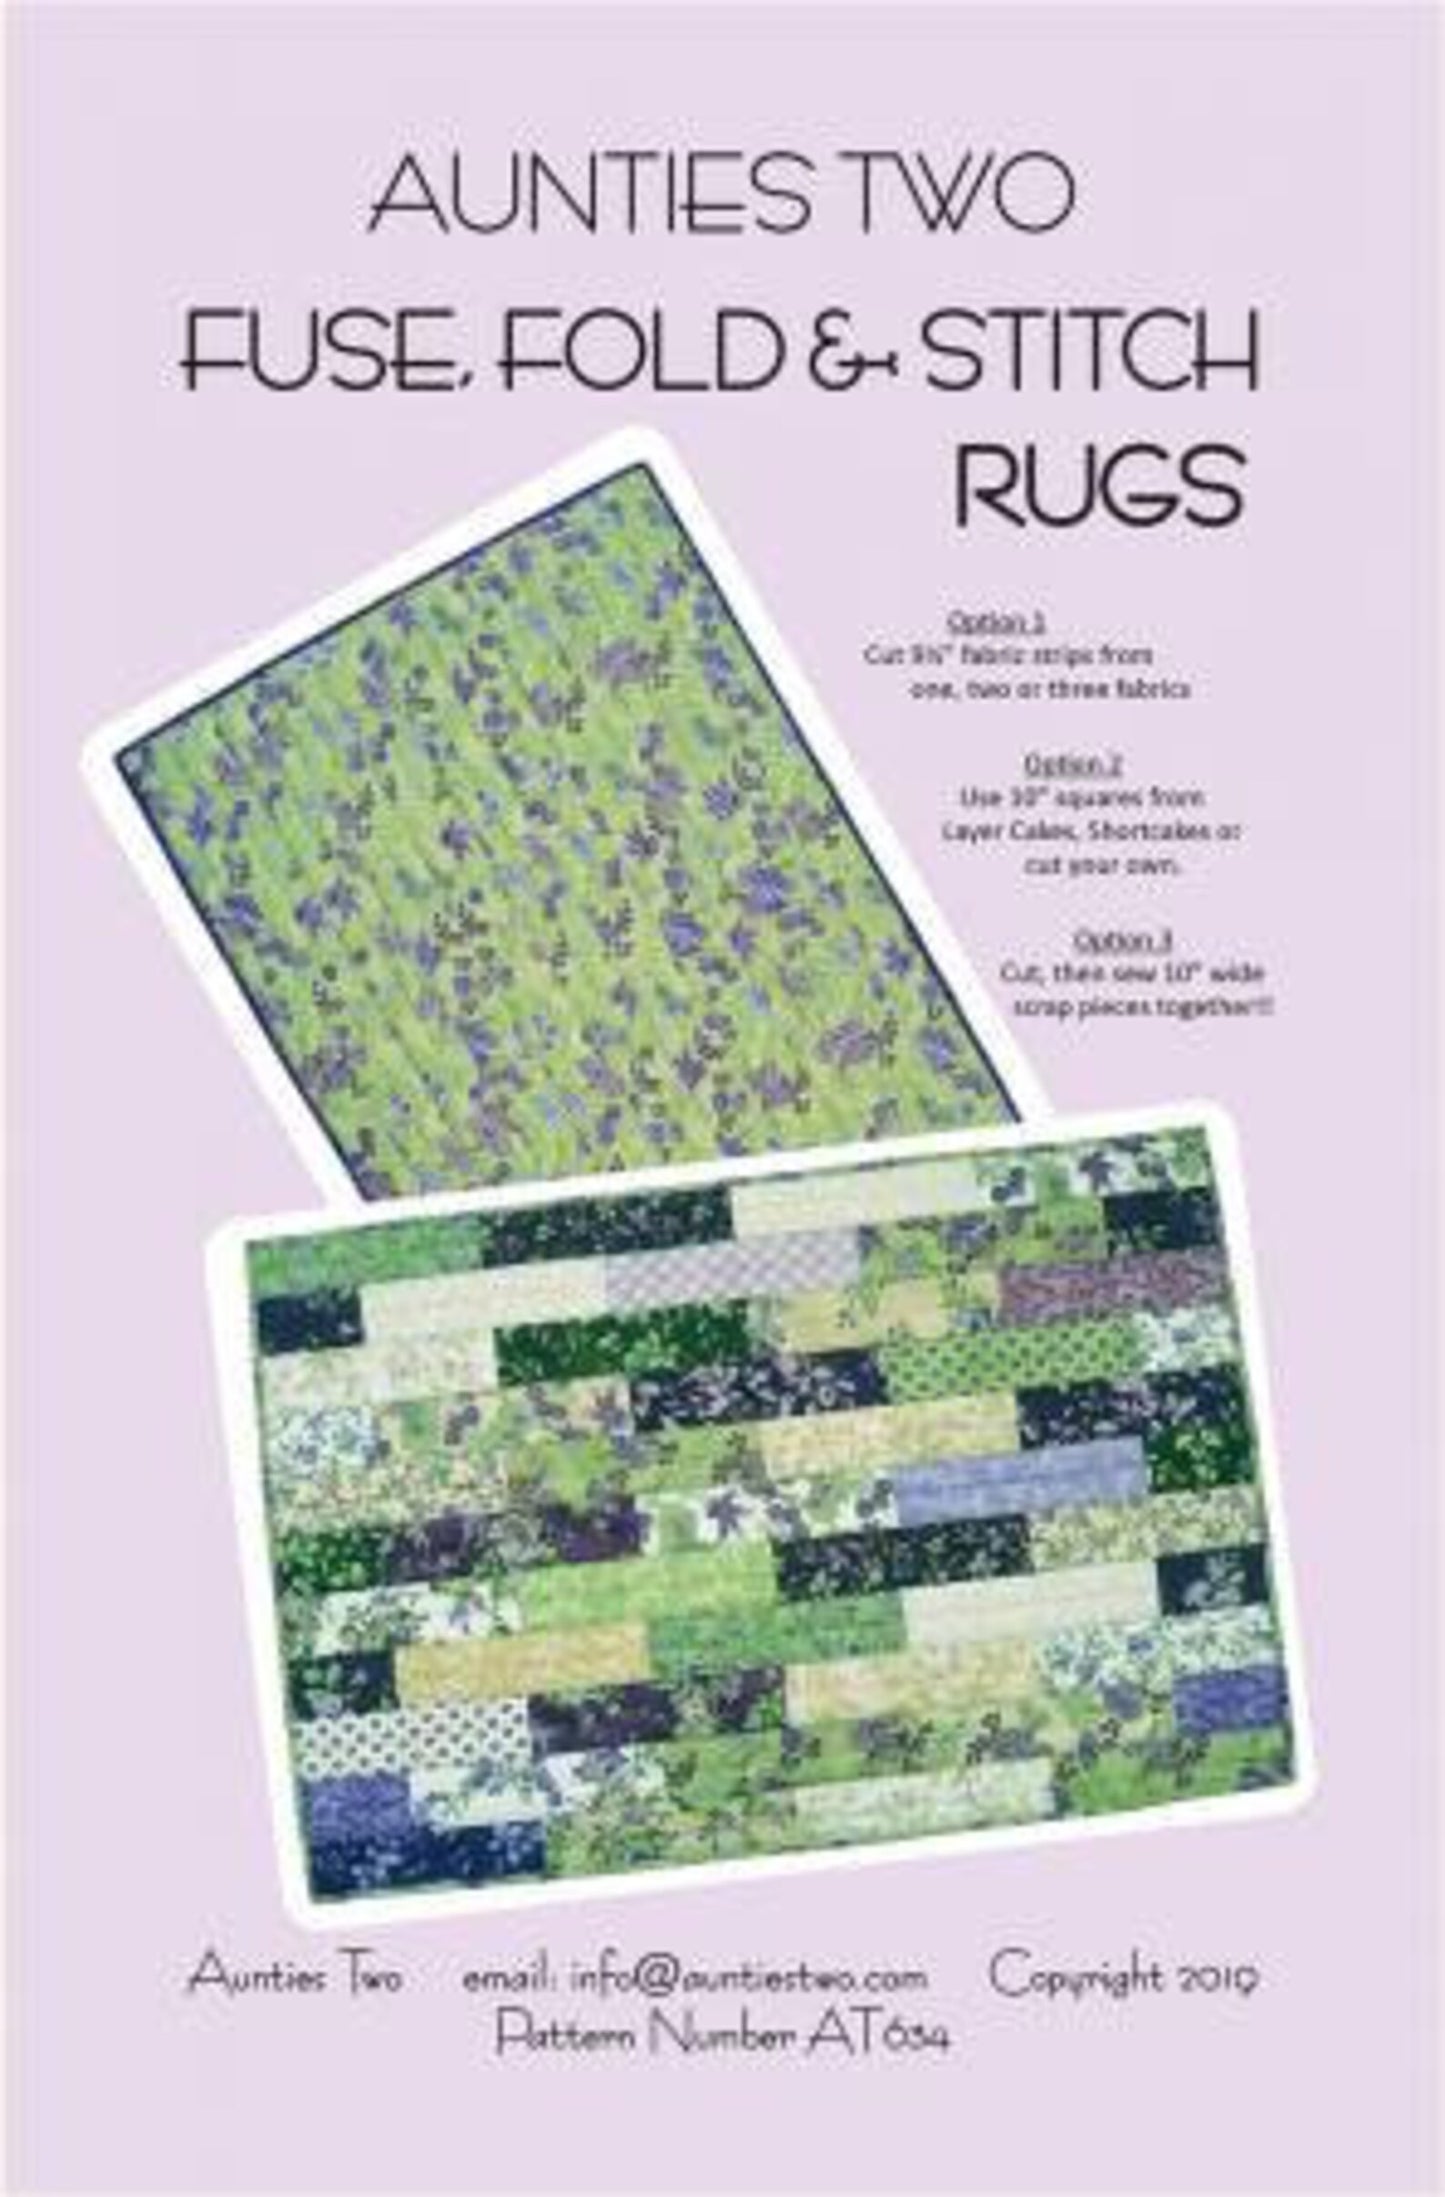 Aunties Two Fuse, fold & Stitch Rugs